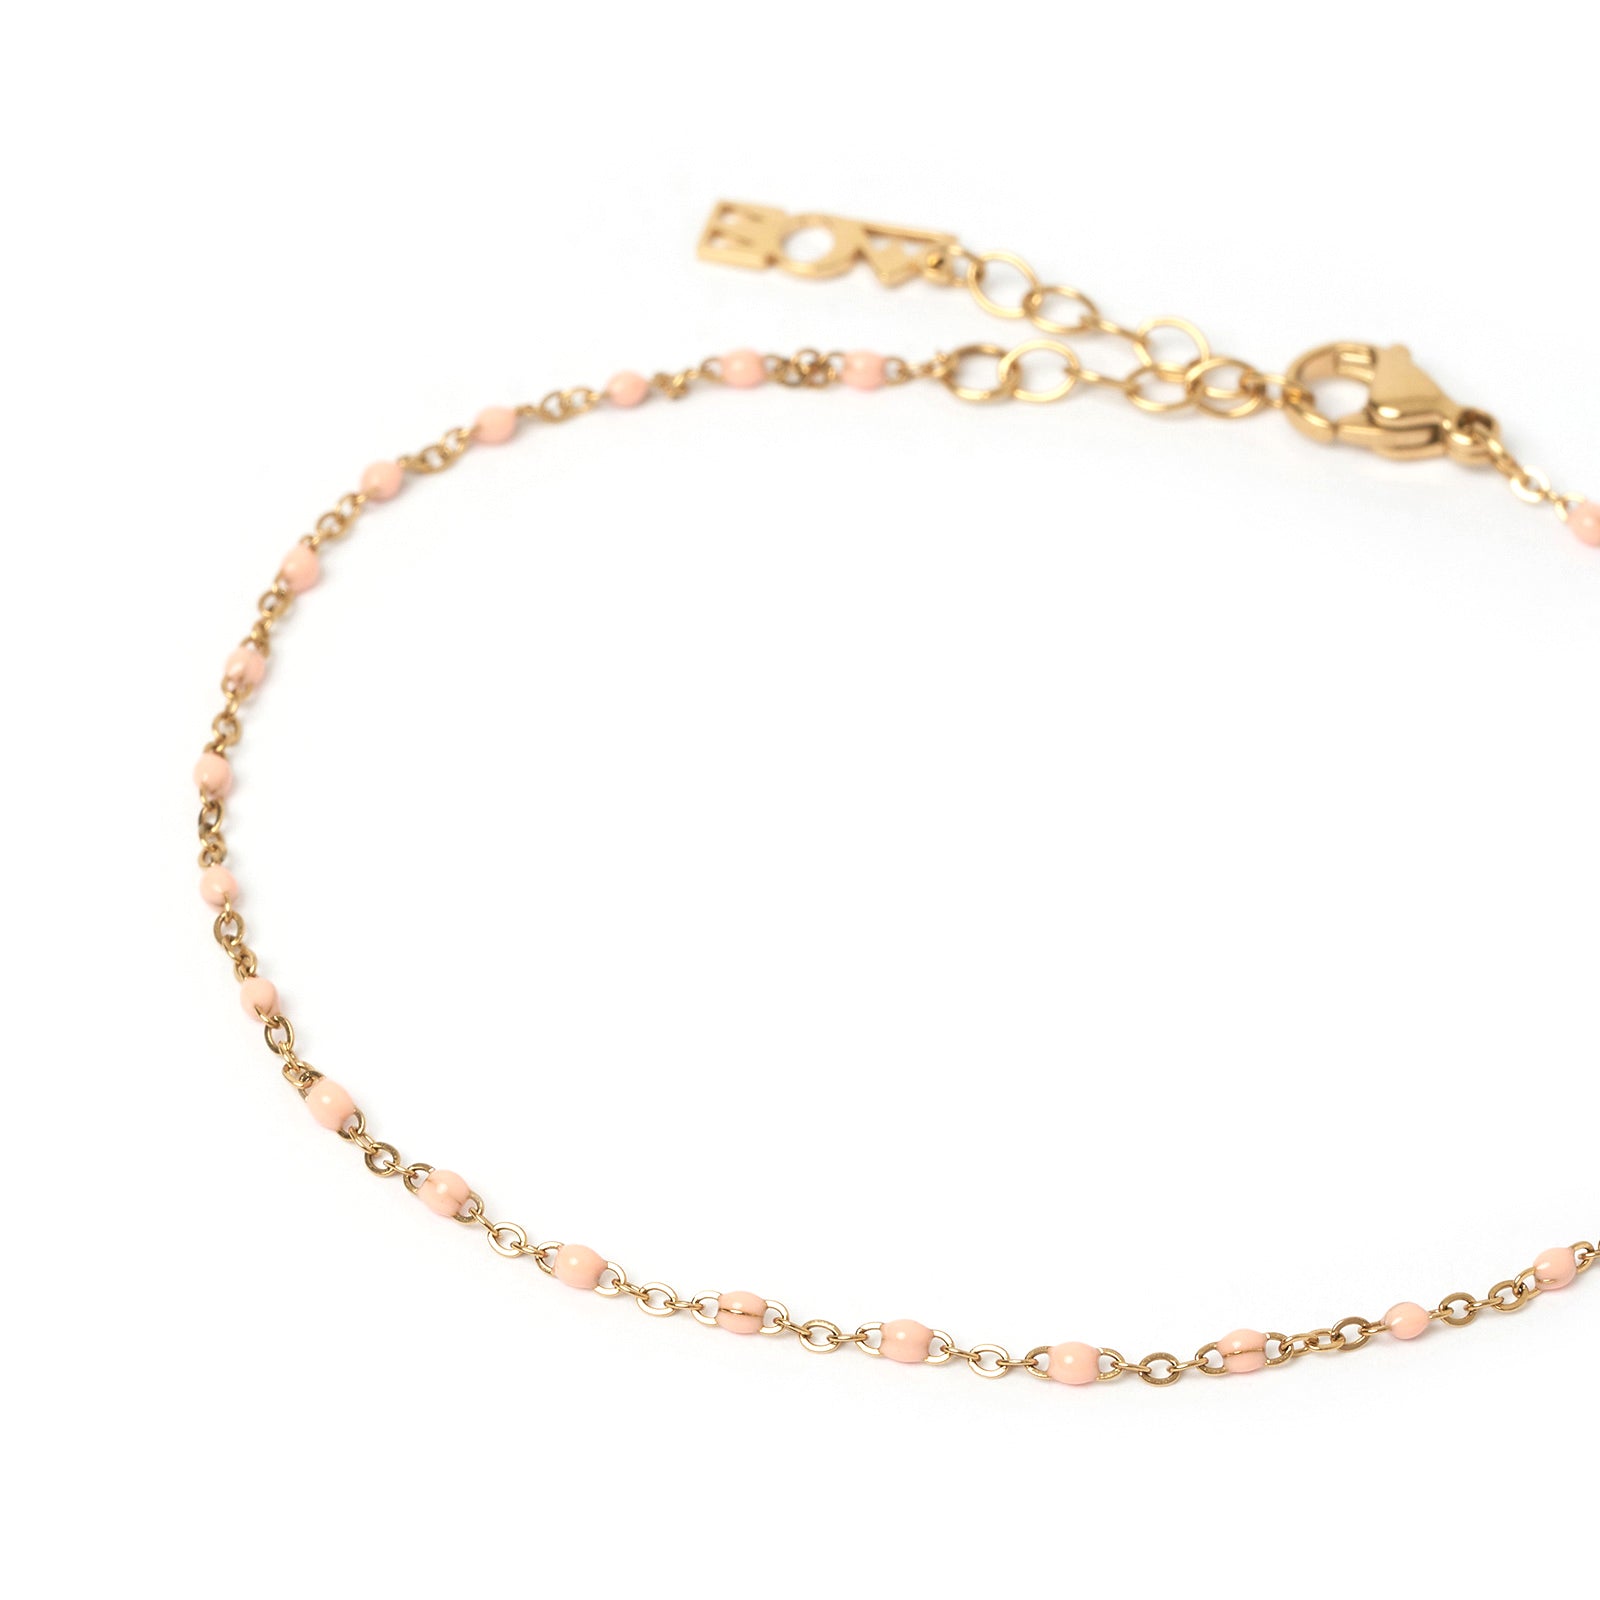 Peggy Gold and Enamel Anklet - Peach